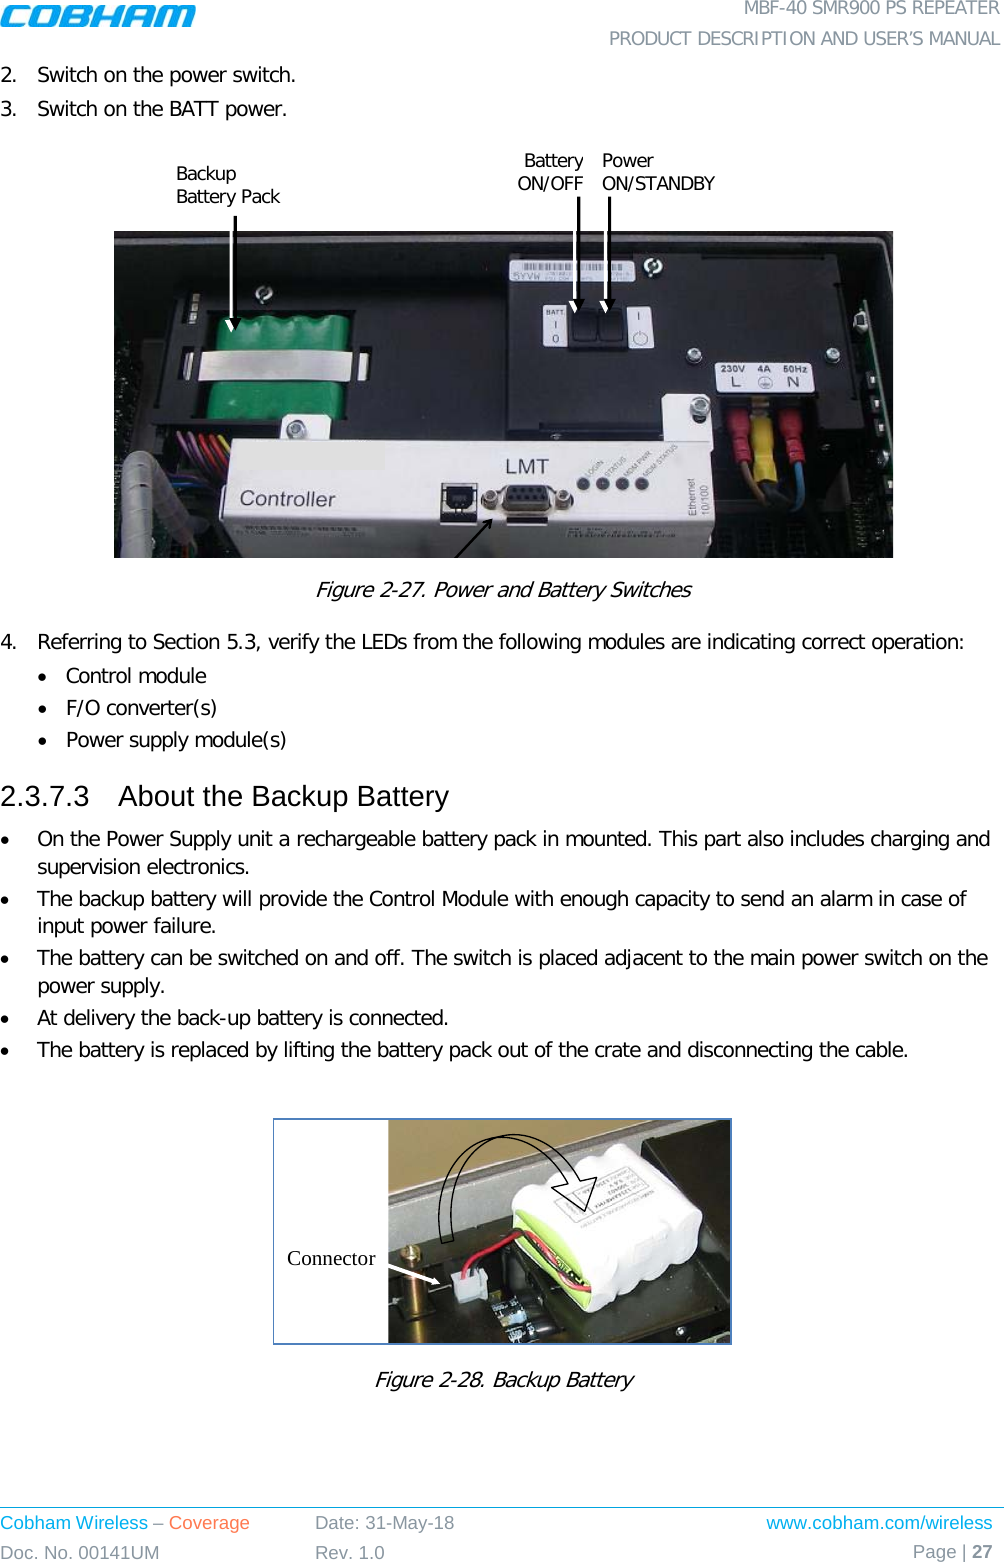  MBF-40 SMR900 PS REPEATER PRODUCT DESCRIPTION AND USER’S MANUAL Cobham Wireless – Coverage Date: 31-May-18 www.cobham.com/wireless Doc. No. 00141UM Rev. 1.0 Page | 27  2.  Switch on the power switch. 3.  Switch on the BATT power.     Figure  2-27. Power and Battery Switches 4.  Referring to Section  5.3, verify the LEDs from the following modules are indicating correct operation:  • Control module • F/O converter(s) • Power supply module(s) 2.3.7.3  About the Backup Battery • On the Power Supply unit a rechargeable battery pack in mounted. This part also includes charging and supervision electronics.  • The backup battery will provide the Control Module with enough capacity to send an alarm in case of input power failure.  • The battery can be switched on and off. The switch is placed adjacent to the main power switch on the power supply. • At delivery the back-up battery is connected.  • The battery is replaced by lifting the battery pack out of the crate and disconnecting the cable.   Figure  2-28. Backup Battery    ConnectorBackup Battery Pack Battery ON/OFF Power ON/STANDBY 